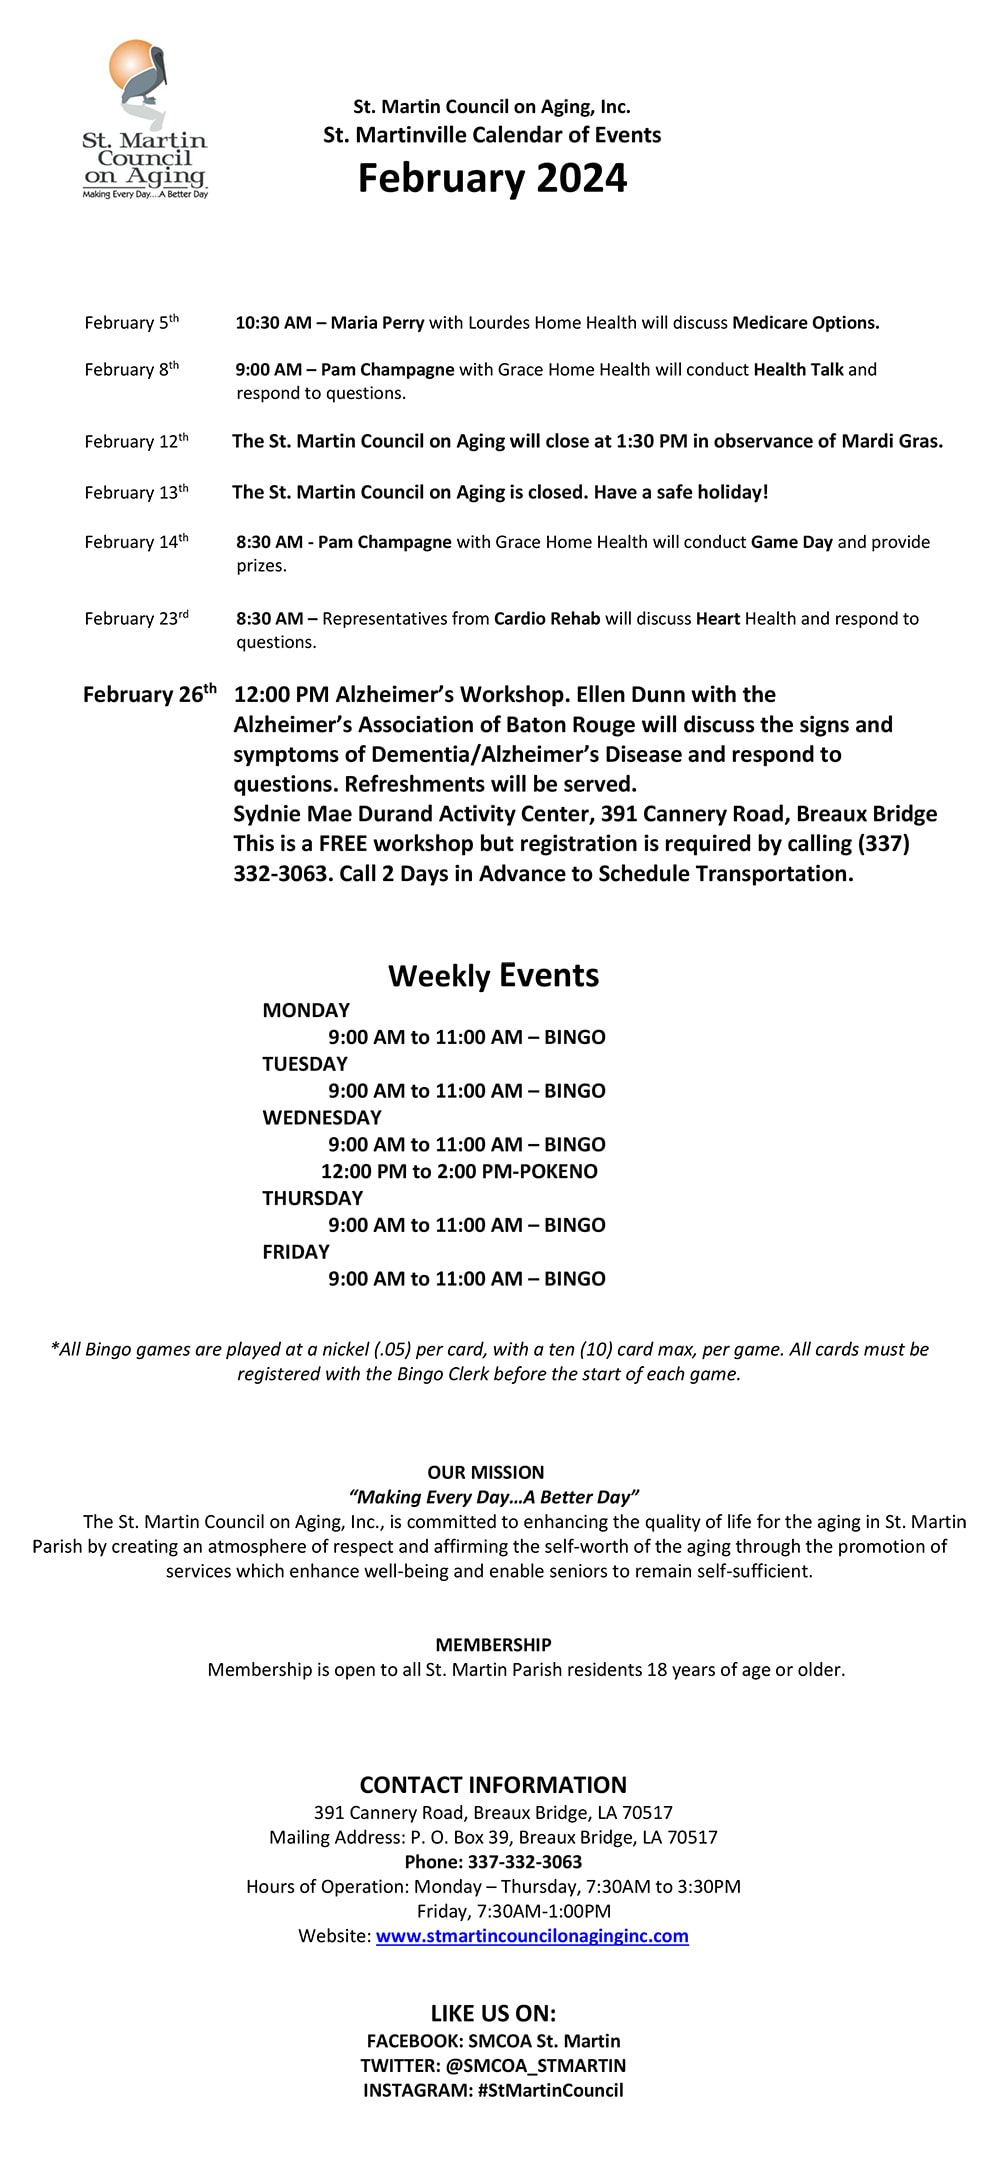 St. Martin Council on Aging, Inc.
St. Martinville Calendar of Events
February 2024